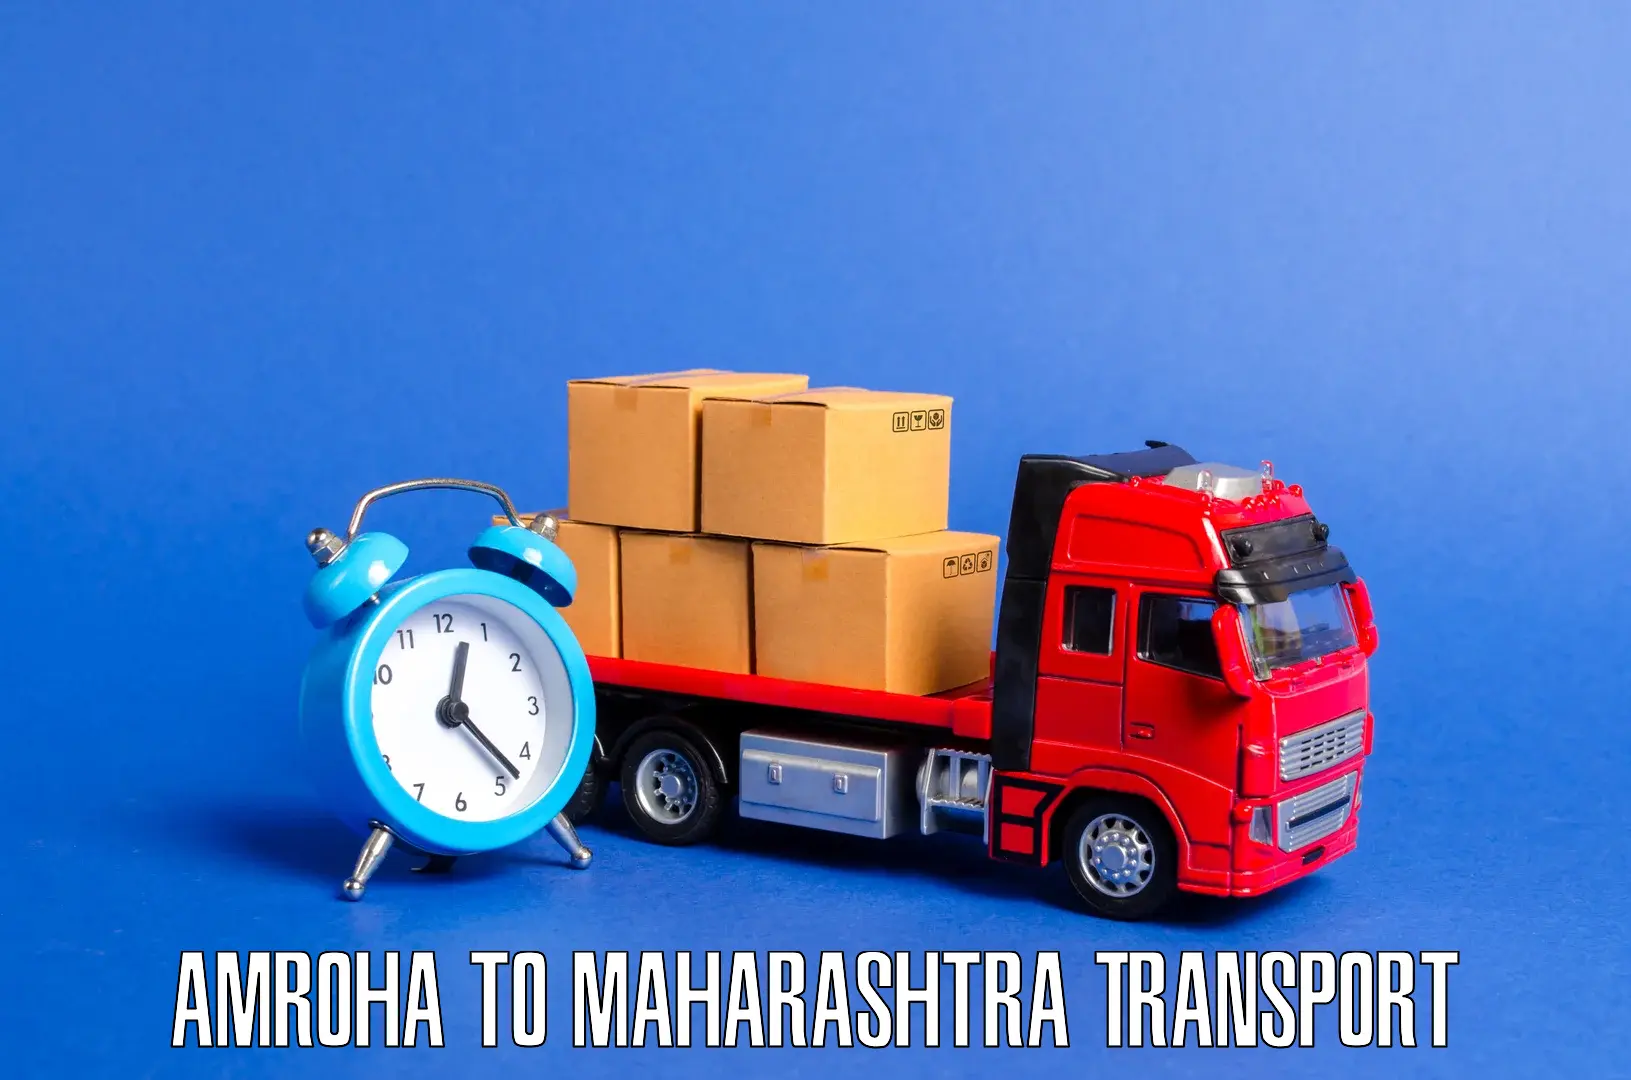 Truck transport companies in India Amroha to Udgir